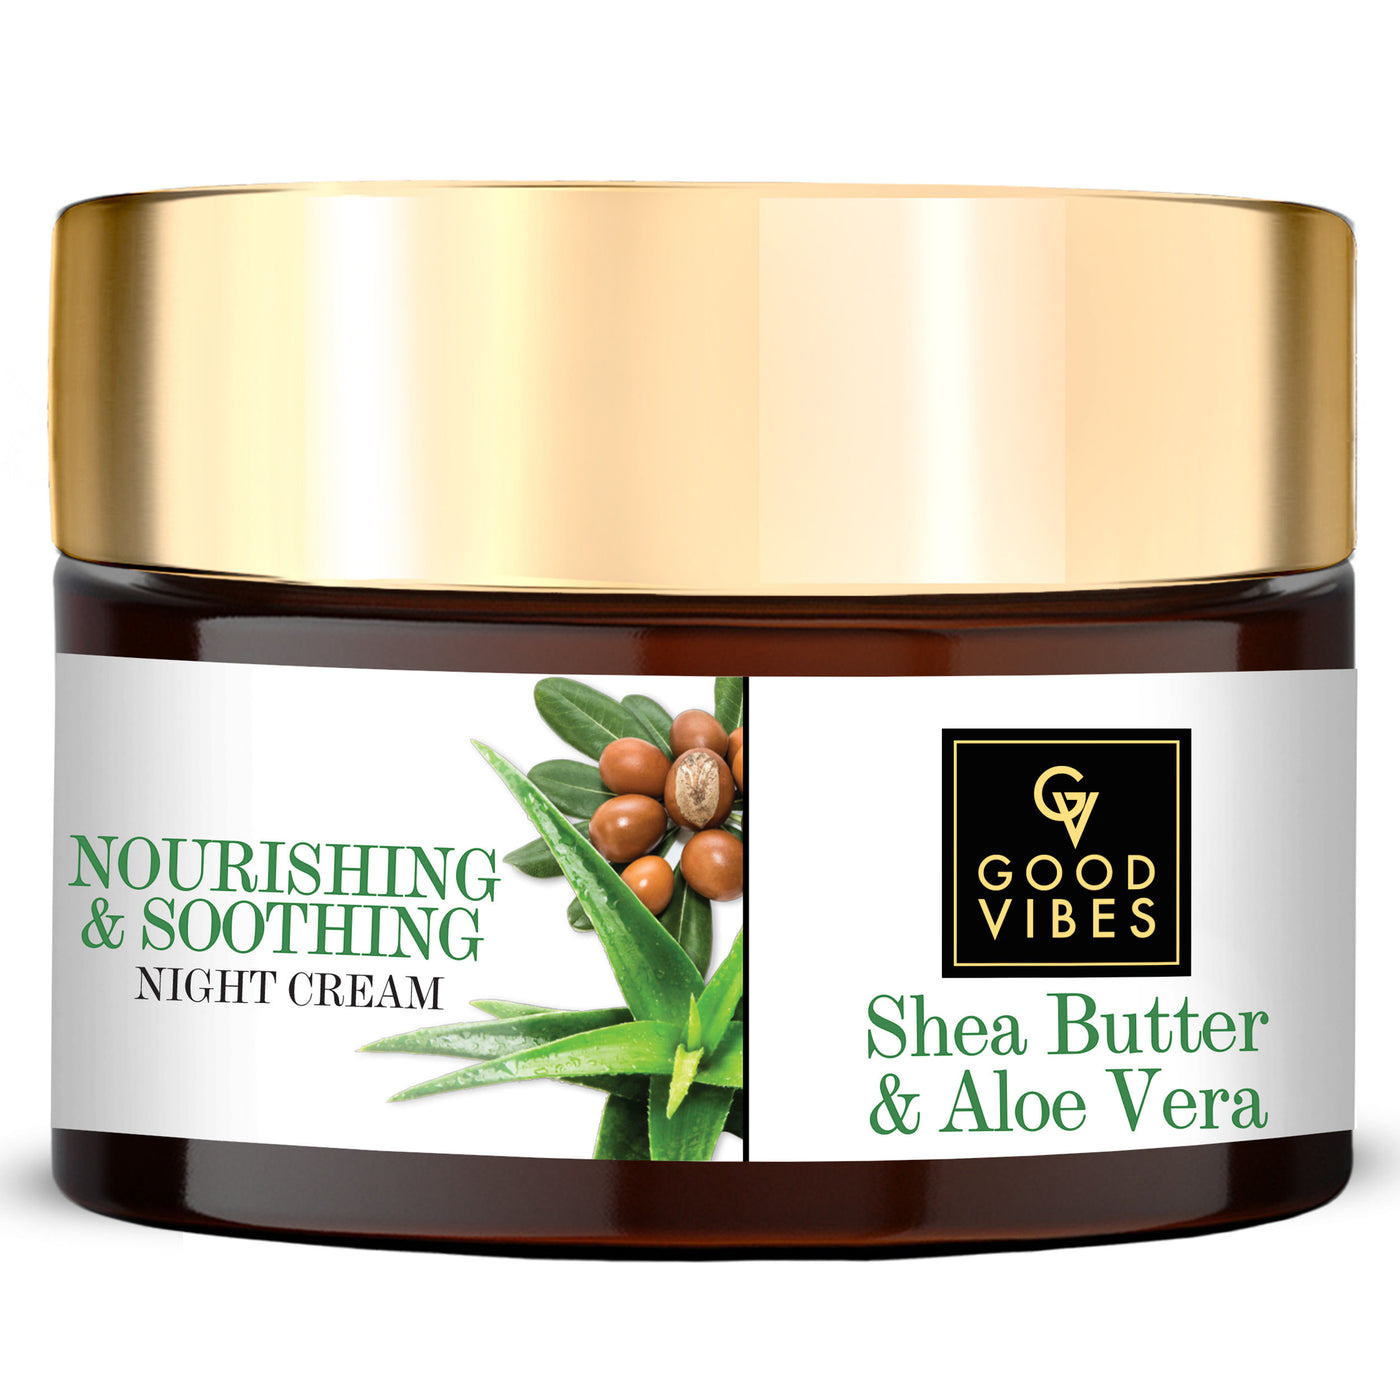 good-vibes-shea-butter-aloe-vera-nourishing-soothing-night-cream-moisturizing-soothing-no-parabens-no-sulphates-no-mineral-oil-50-gm-1